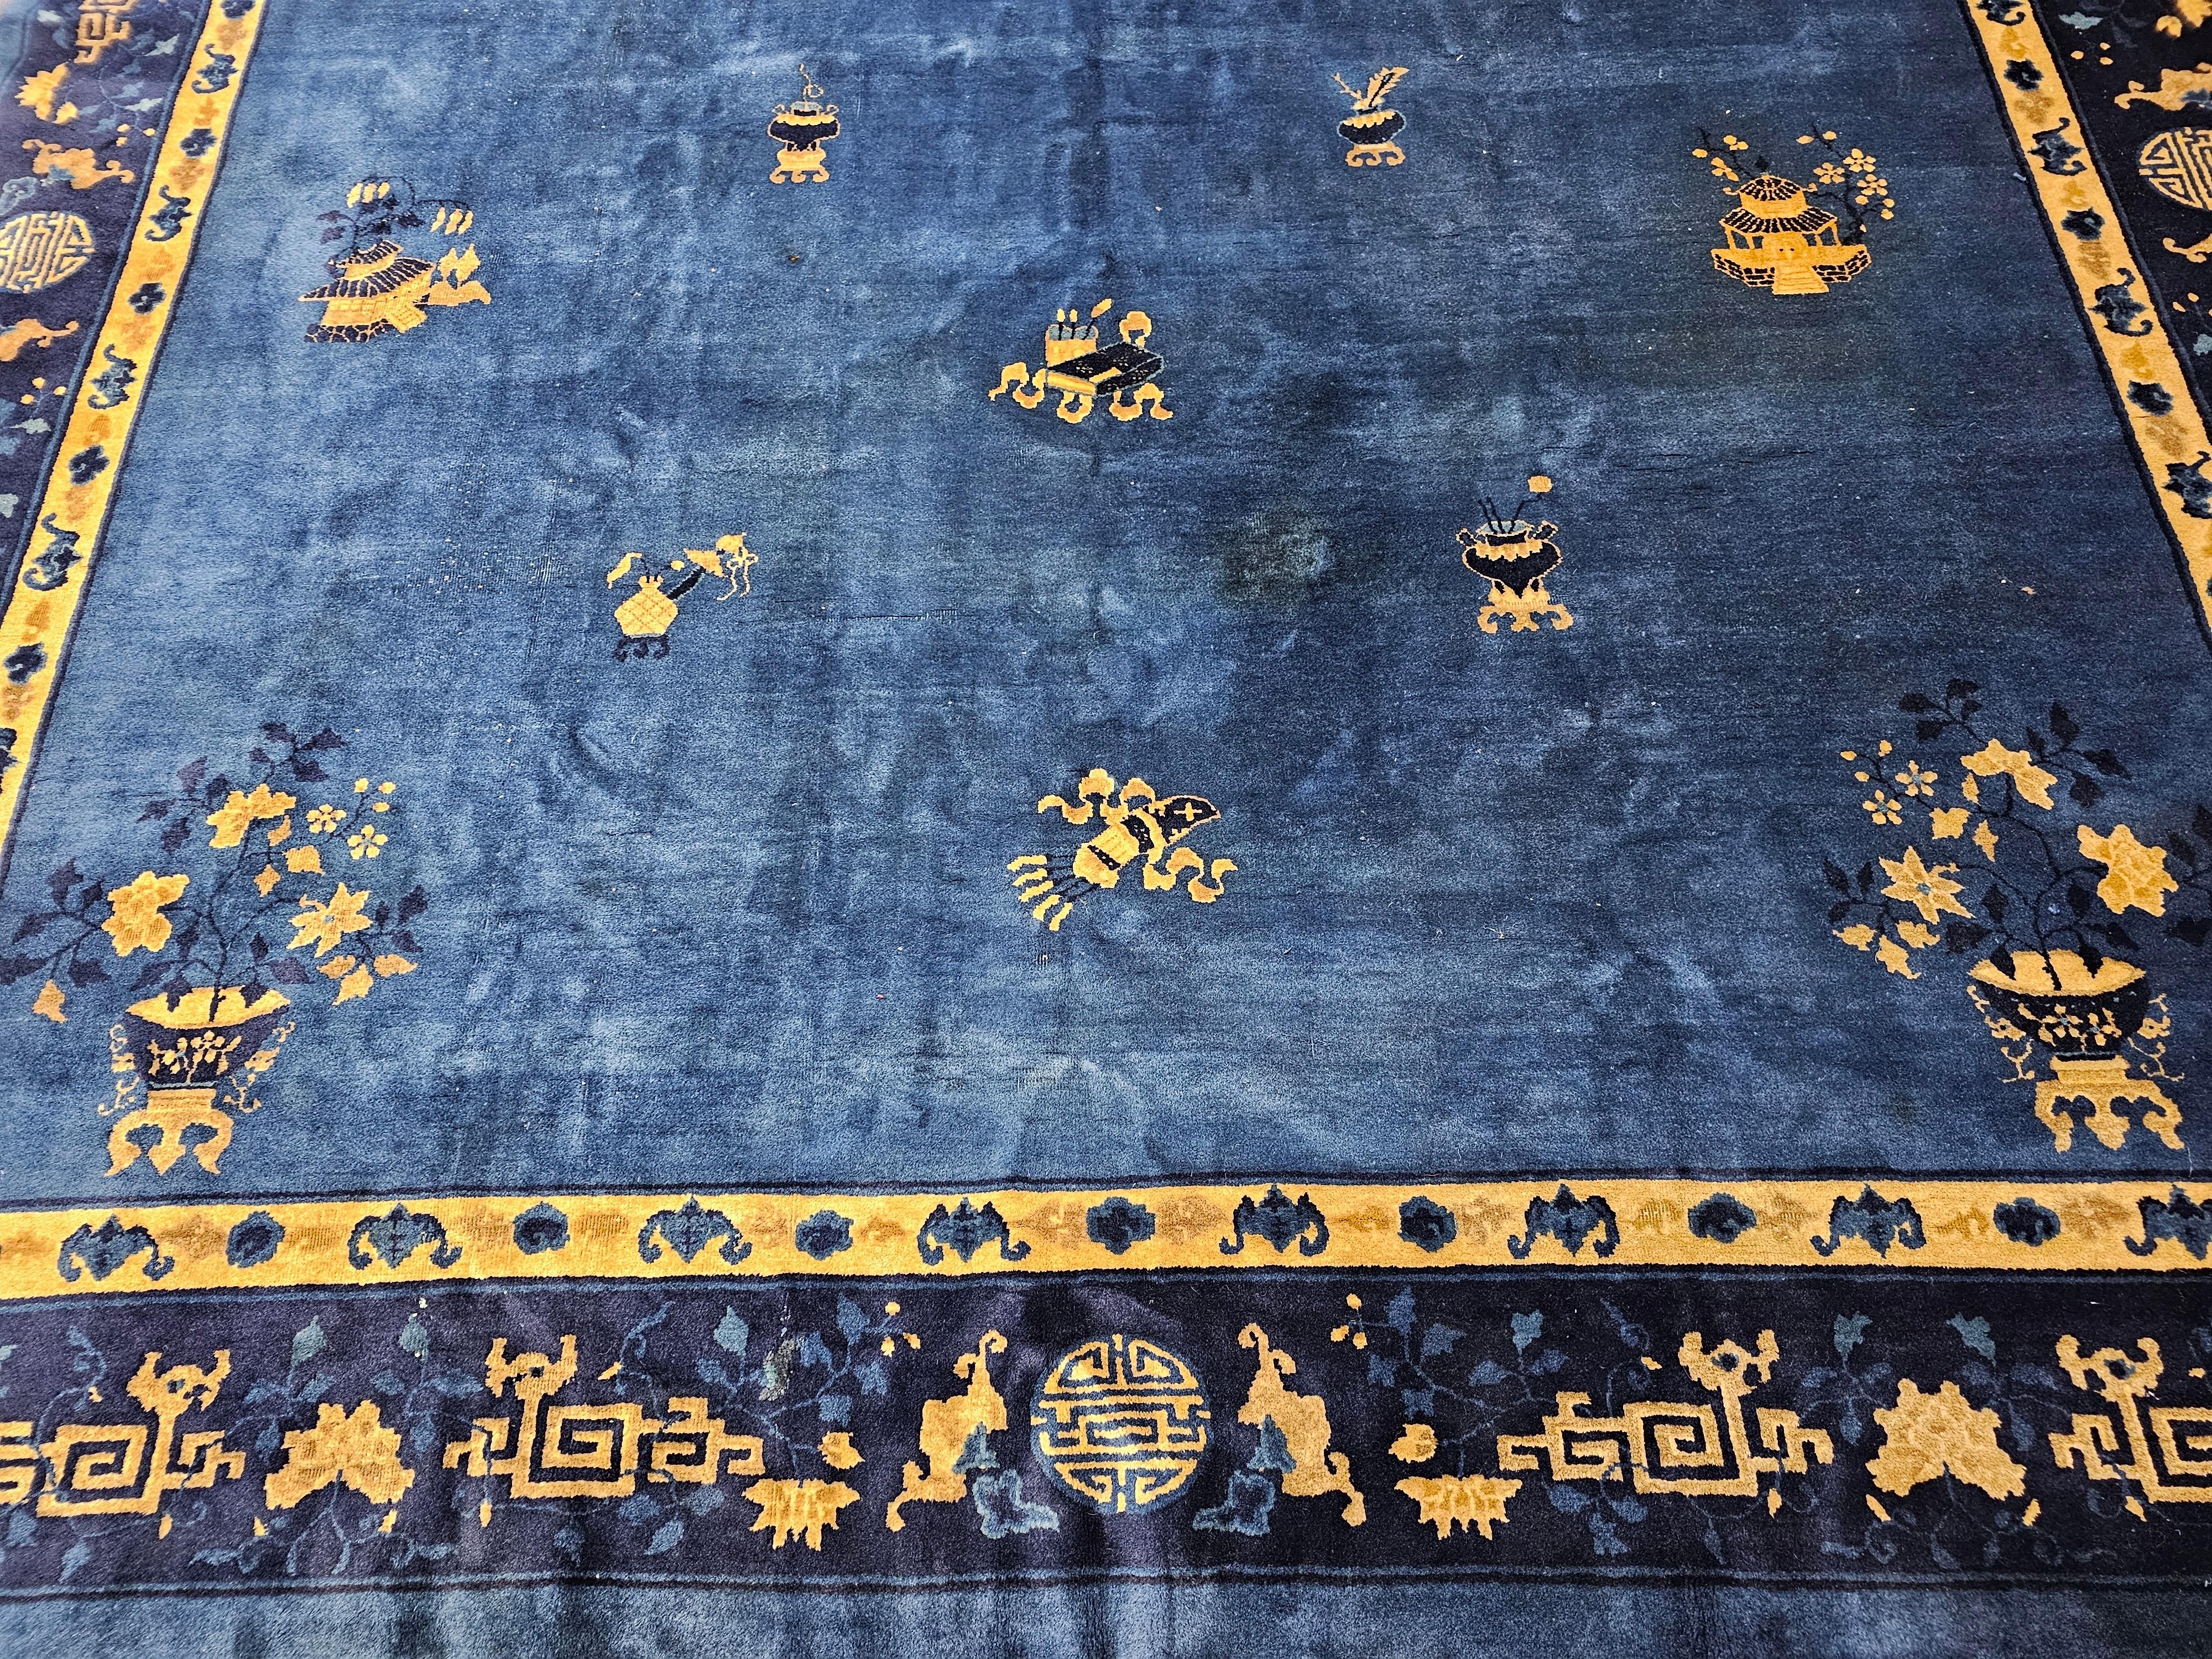 Hand-Woven Vintage Art Deco Chinese Rug with Auspicious Symbols in Royal Blue, Navy, Camel For Sale